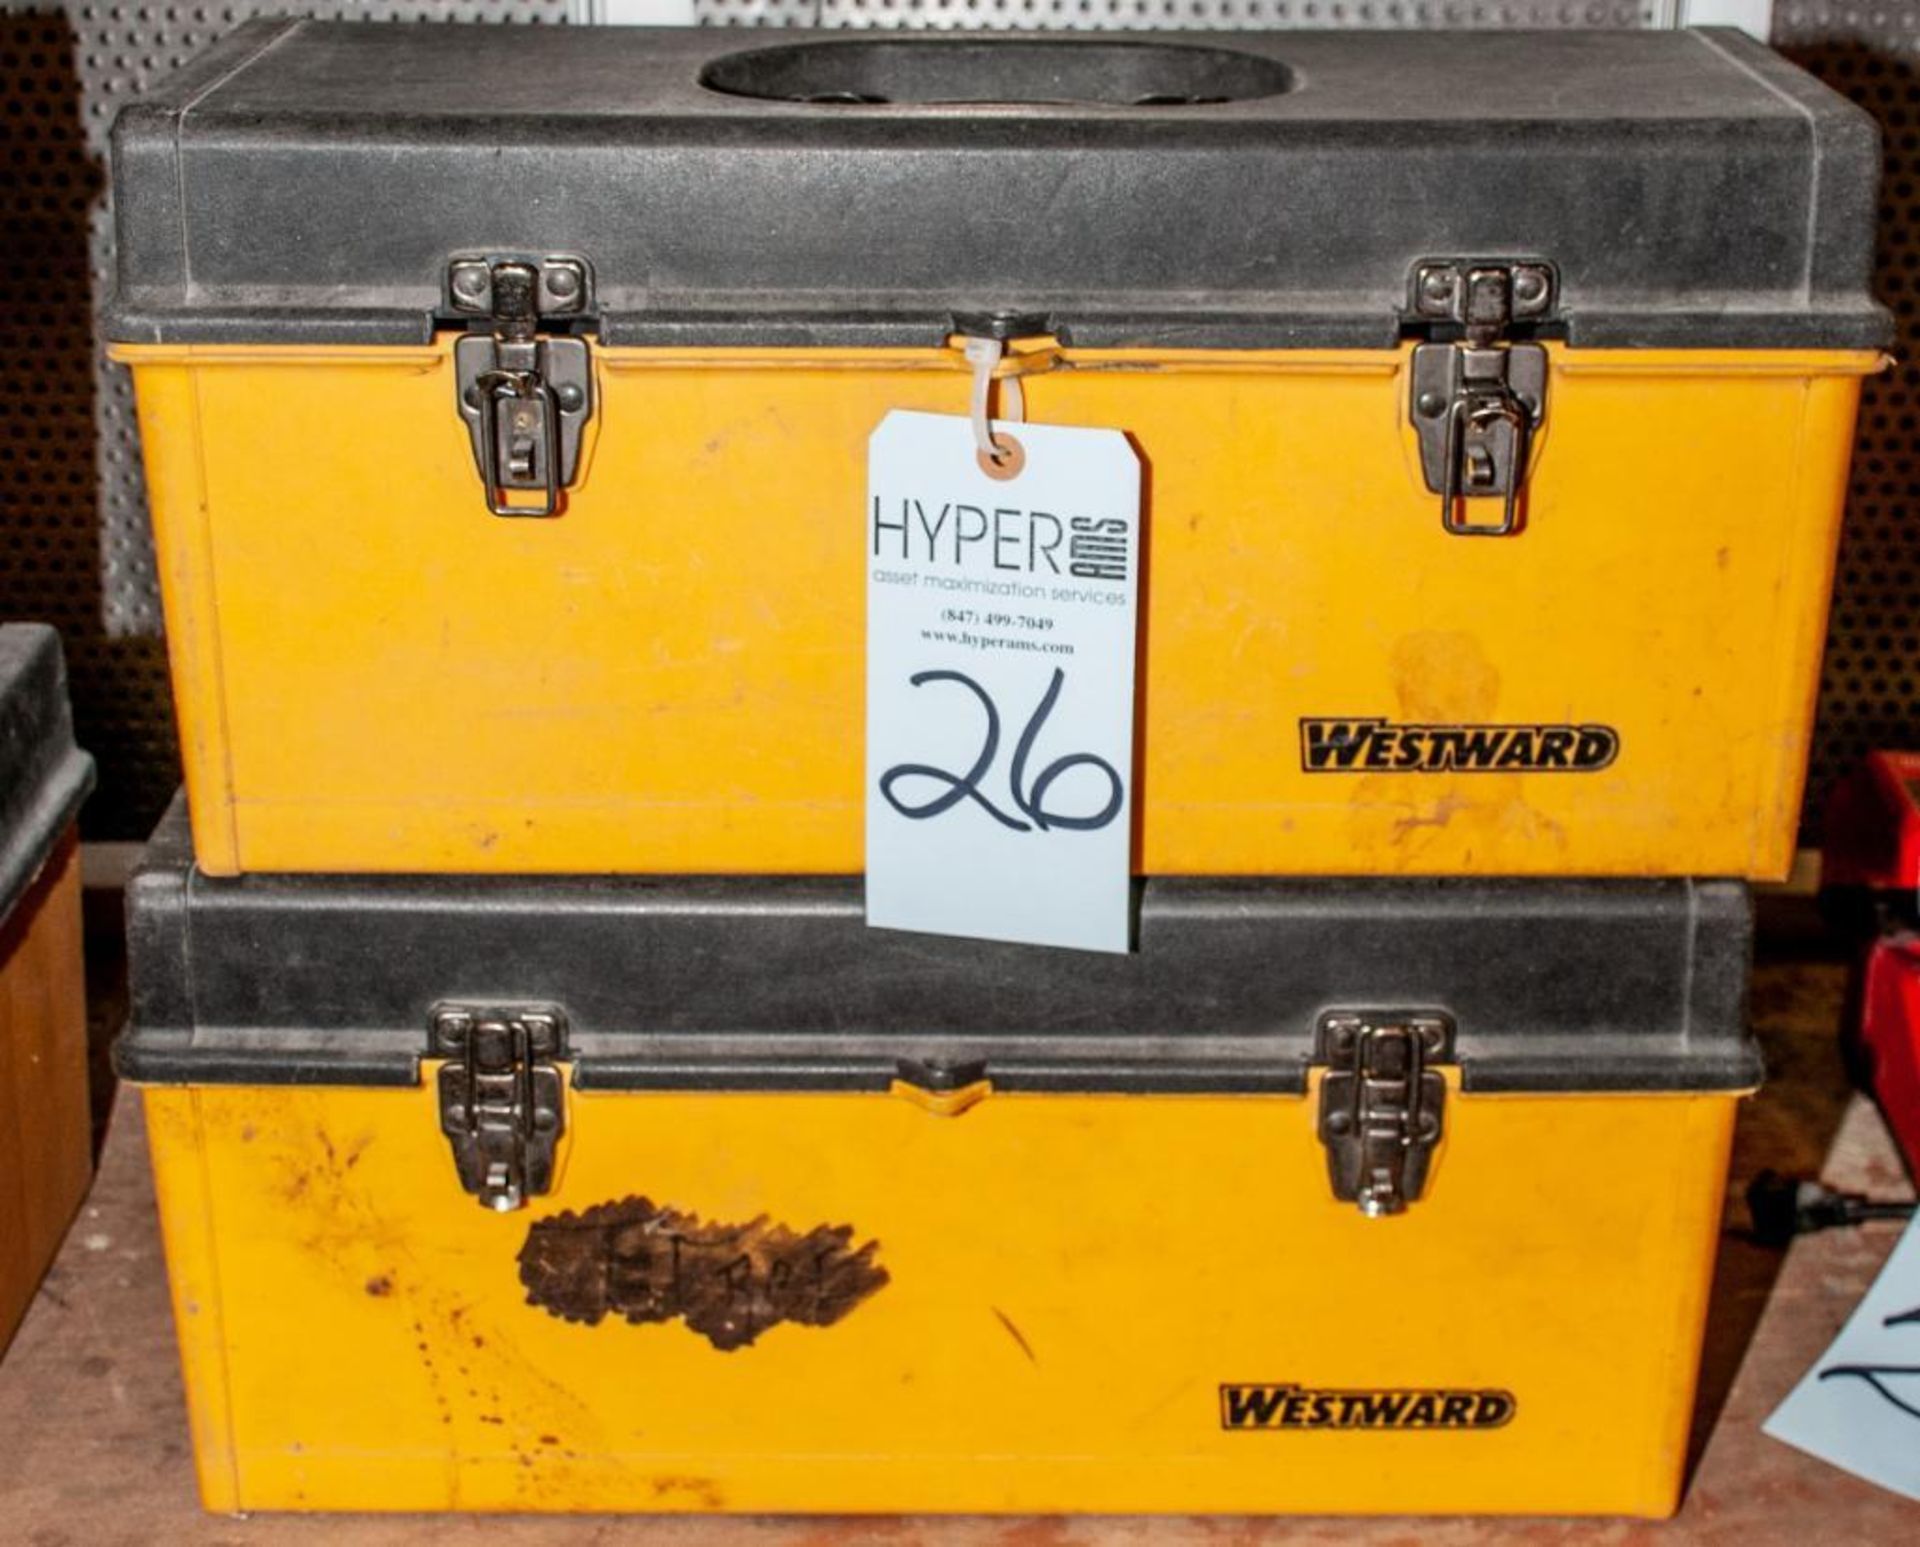 Lot c/o: (2) Westward Toolboxes w/ Tools, Tape Measures, Speed Squares, Magnetic Trays, 2" Disc Hold